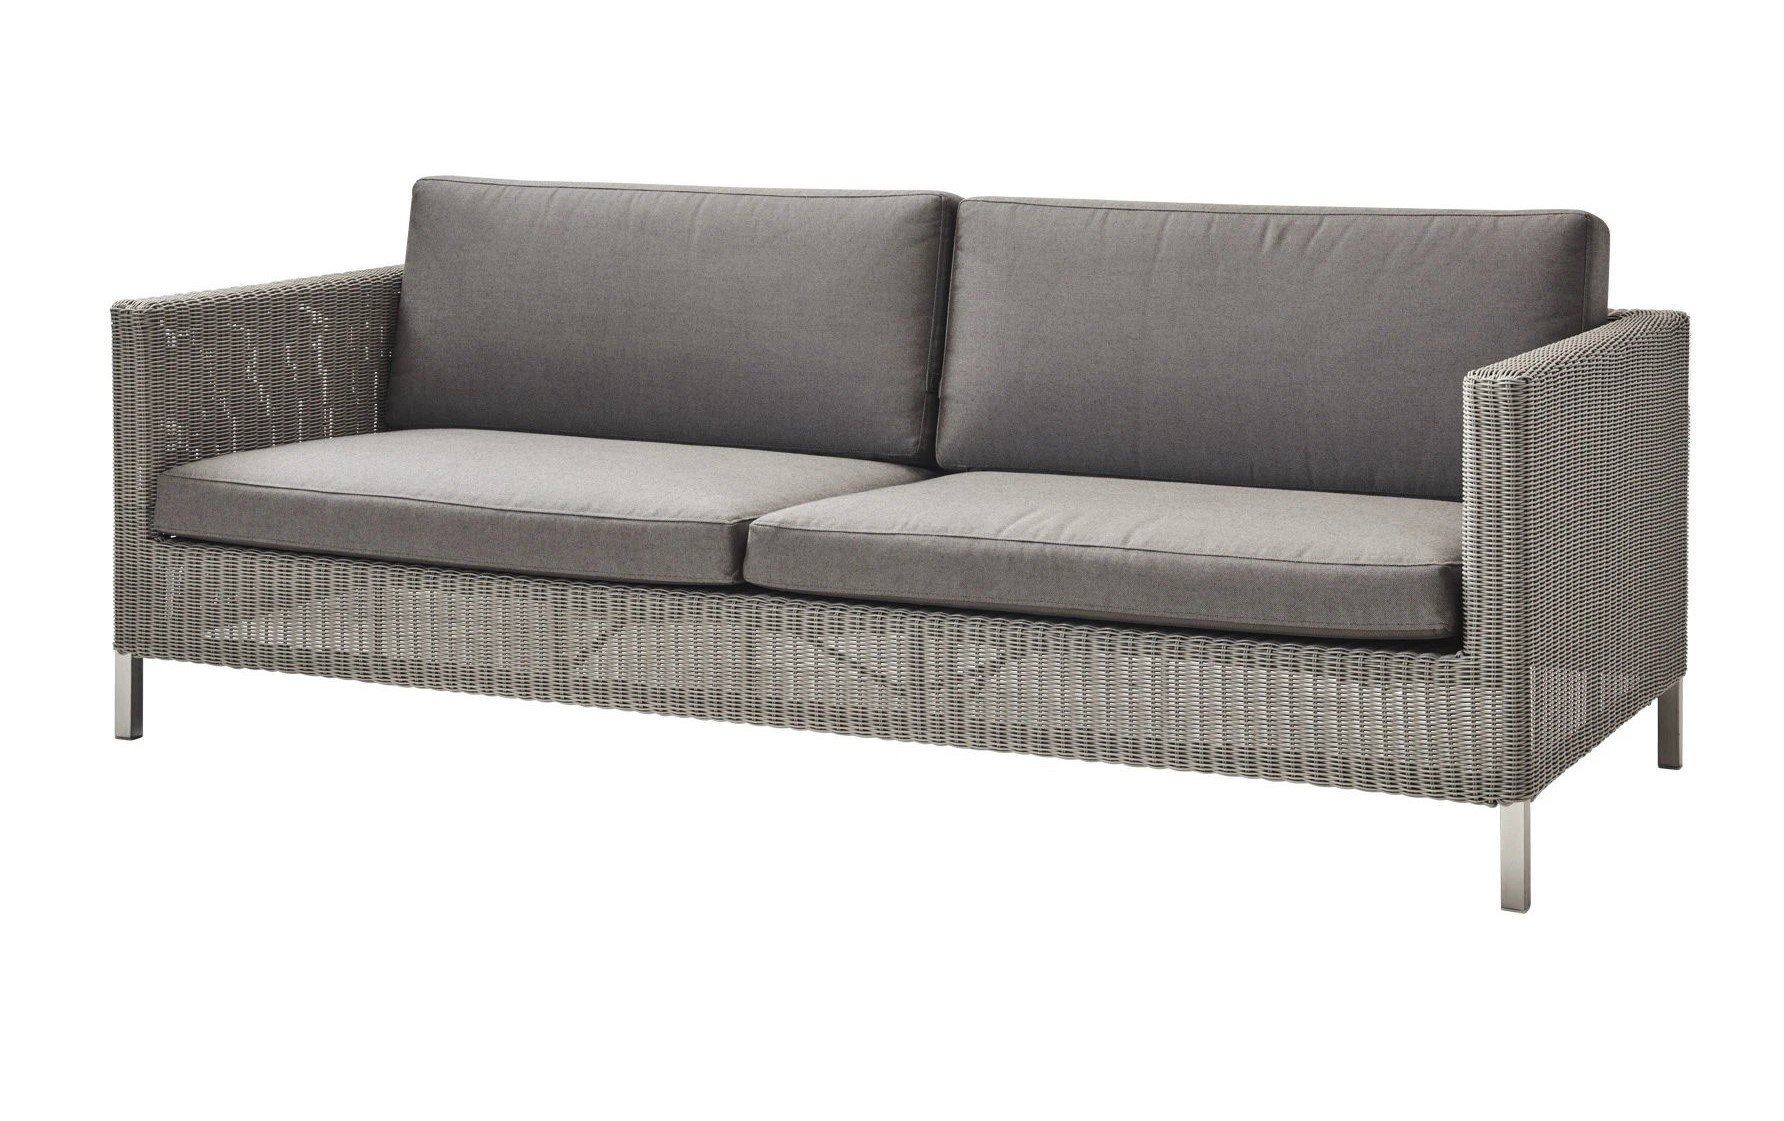 Connect 3-seat Modular Sofa from Cane-line, designed by Cane-line Design Team